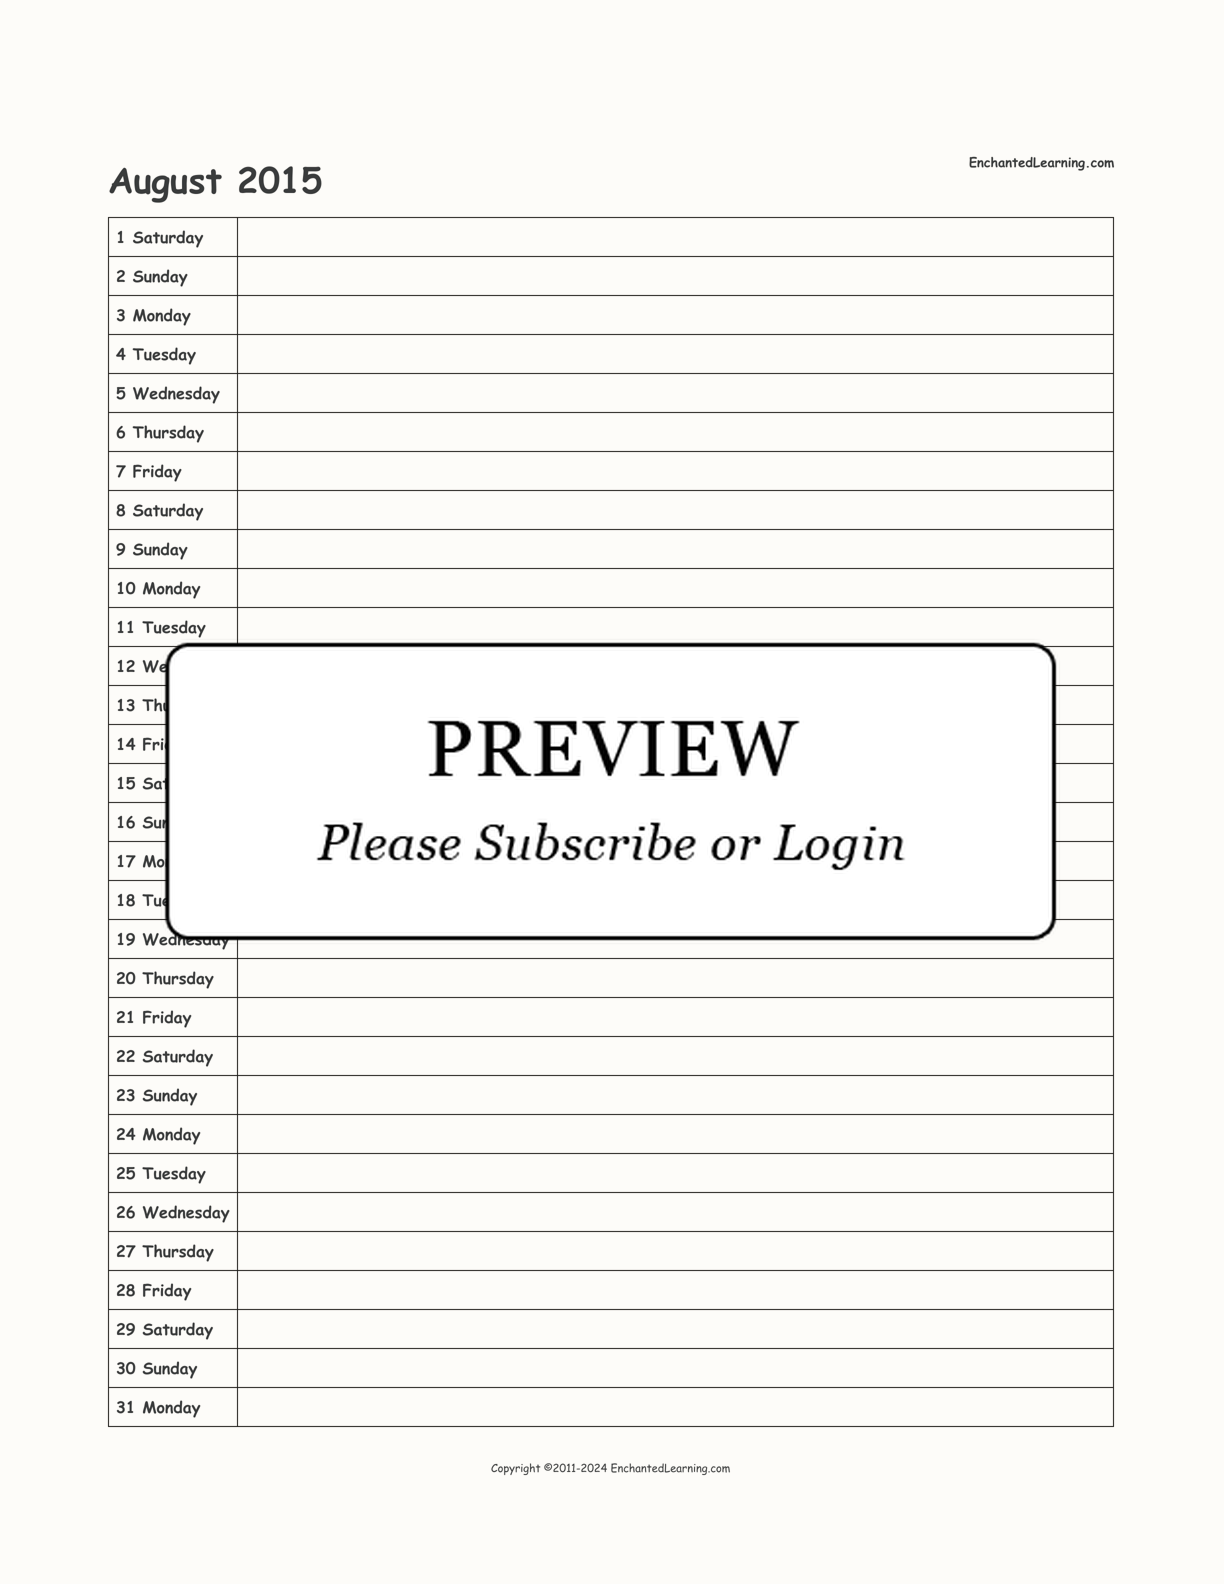 2015 Scheduling Calendar interactive printout page 8